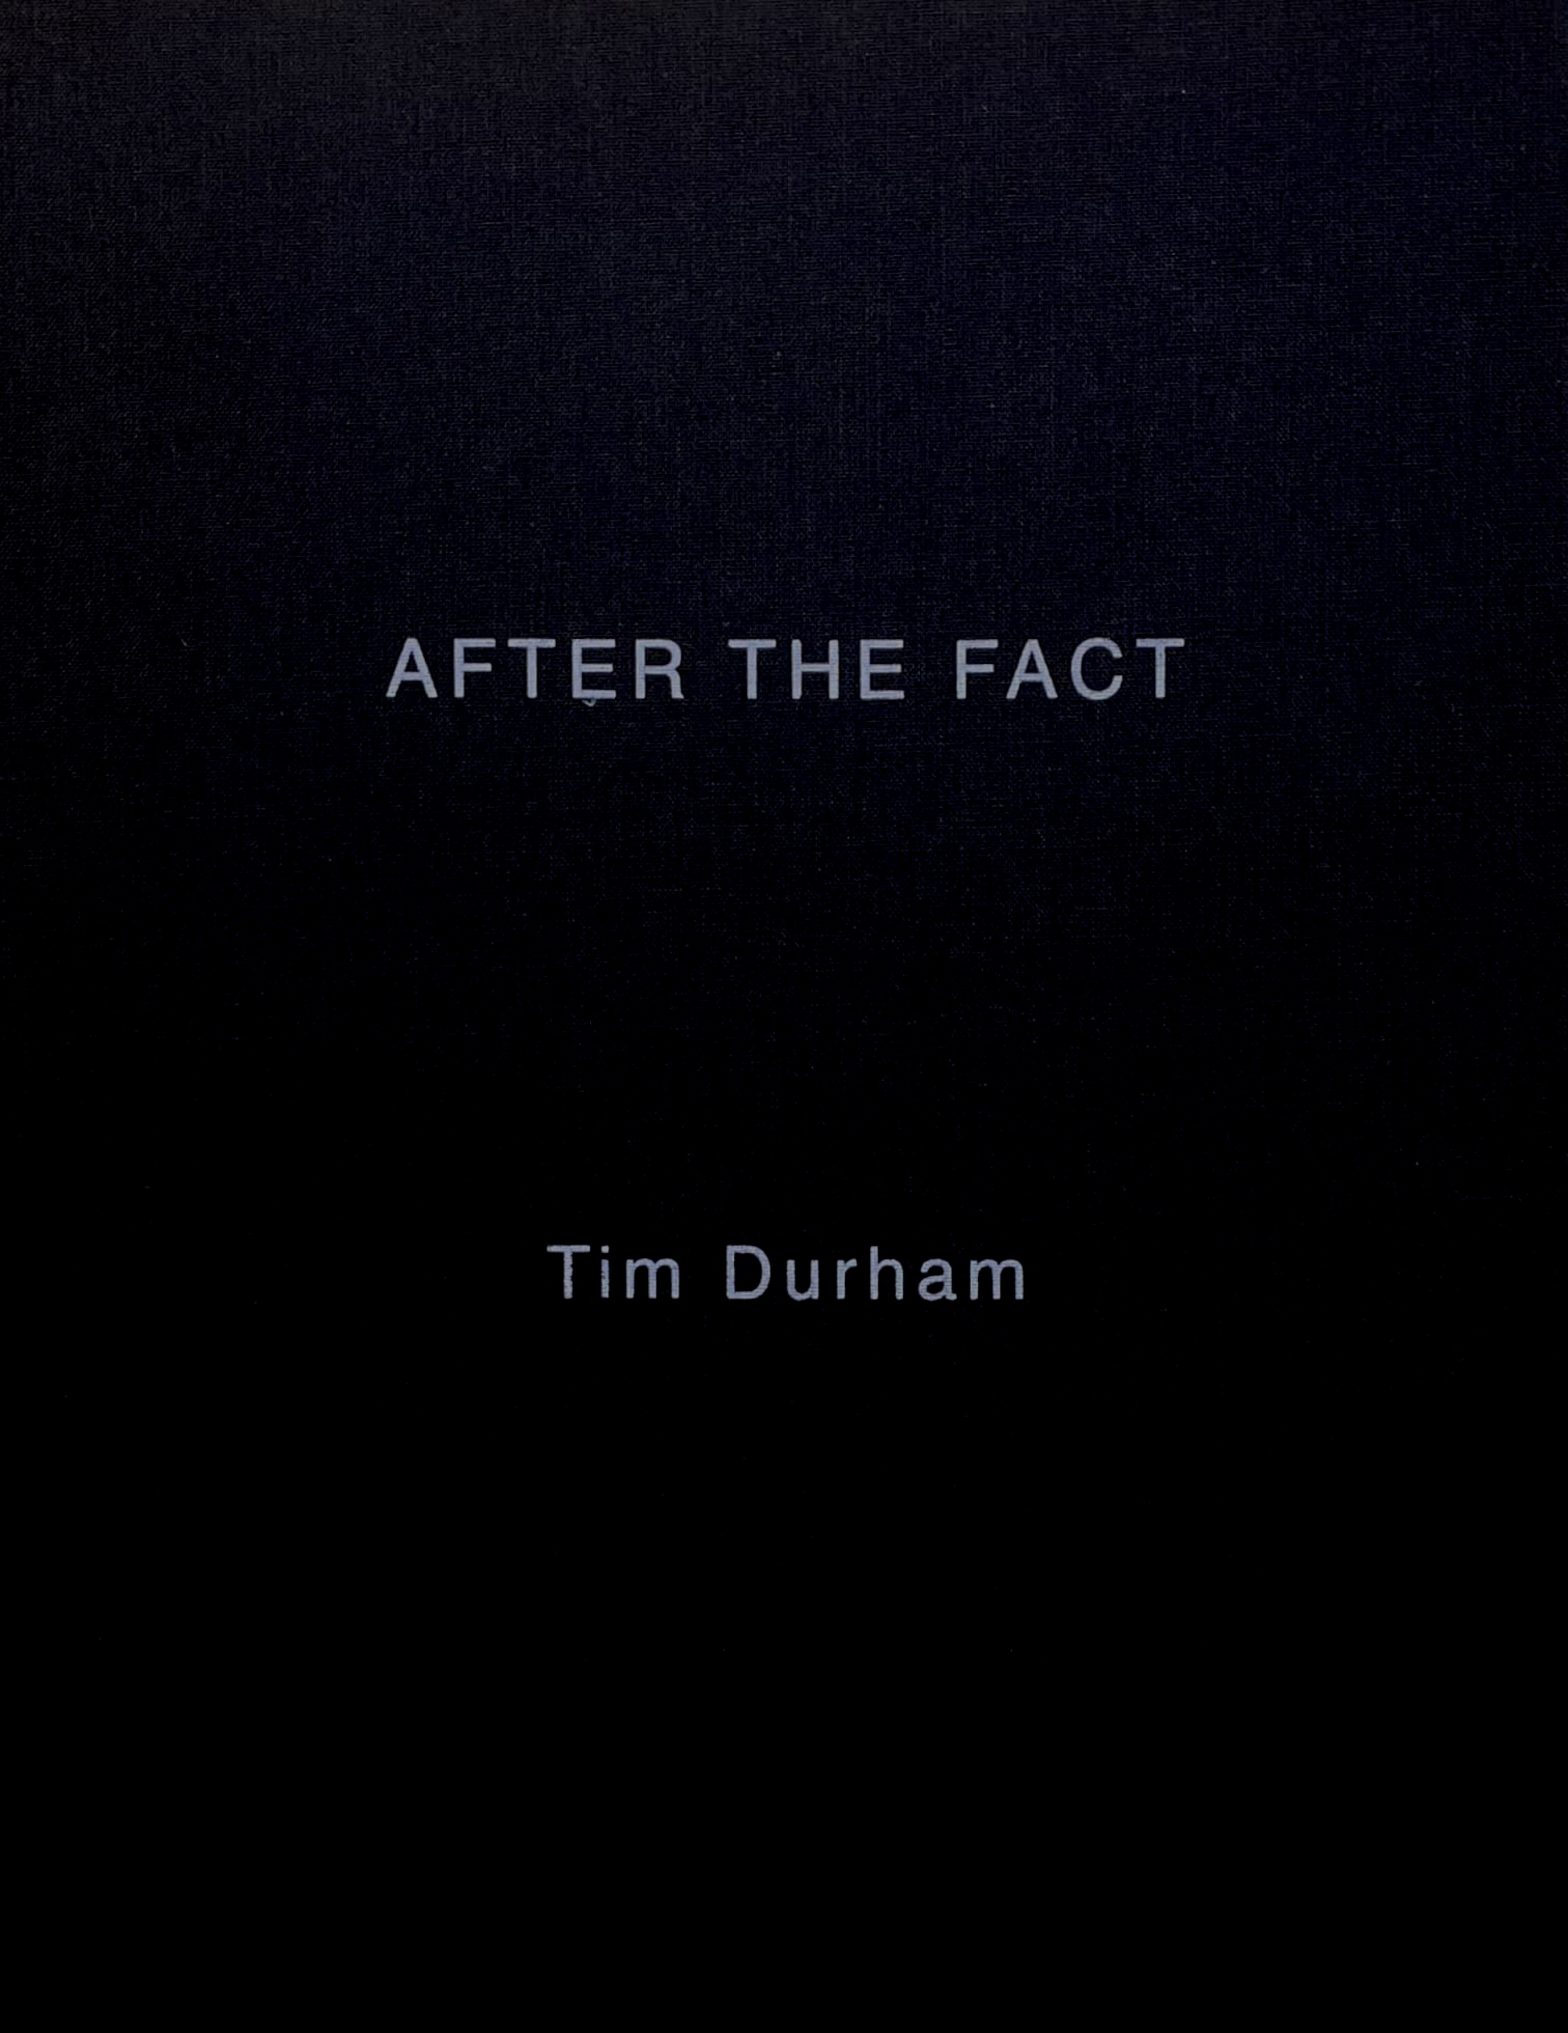 After The Fact, Tim Durham